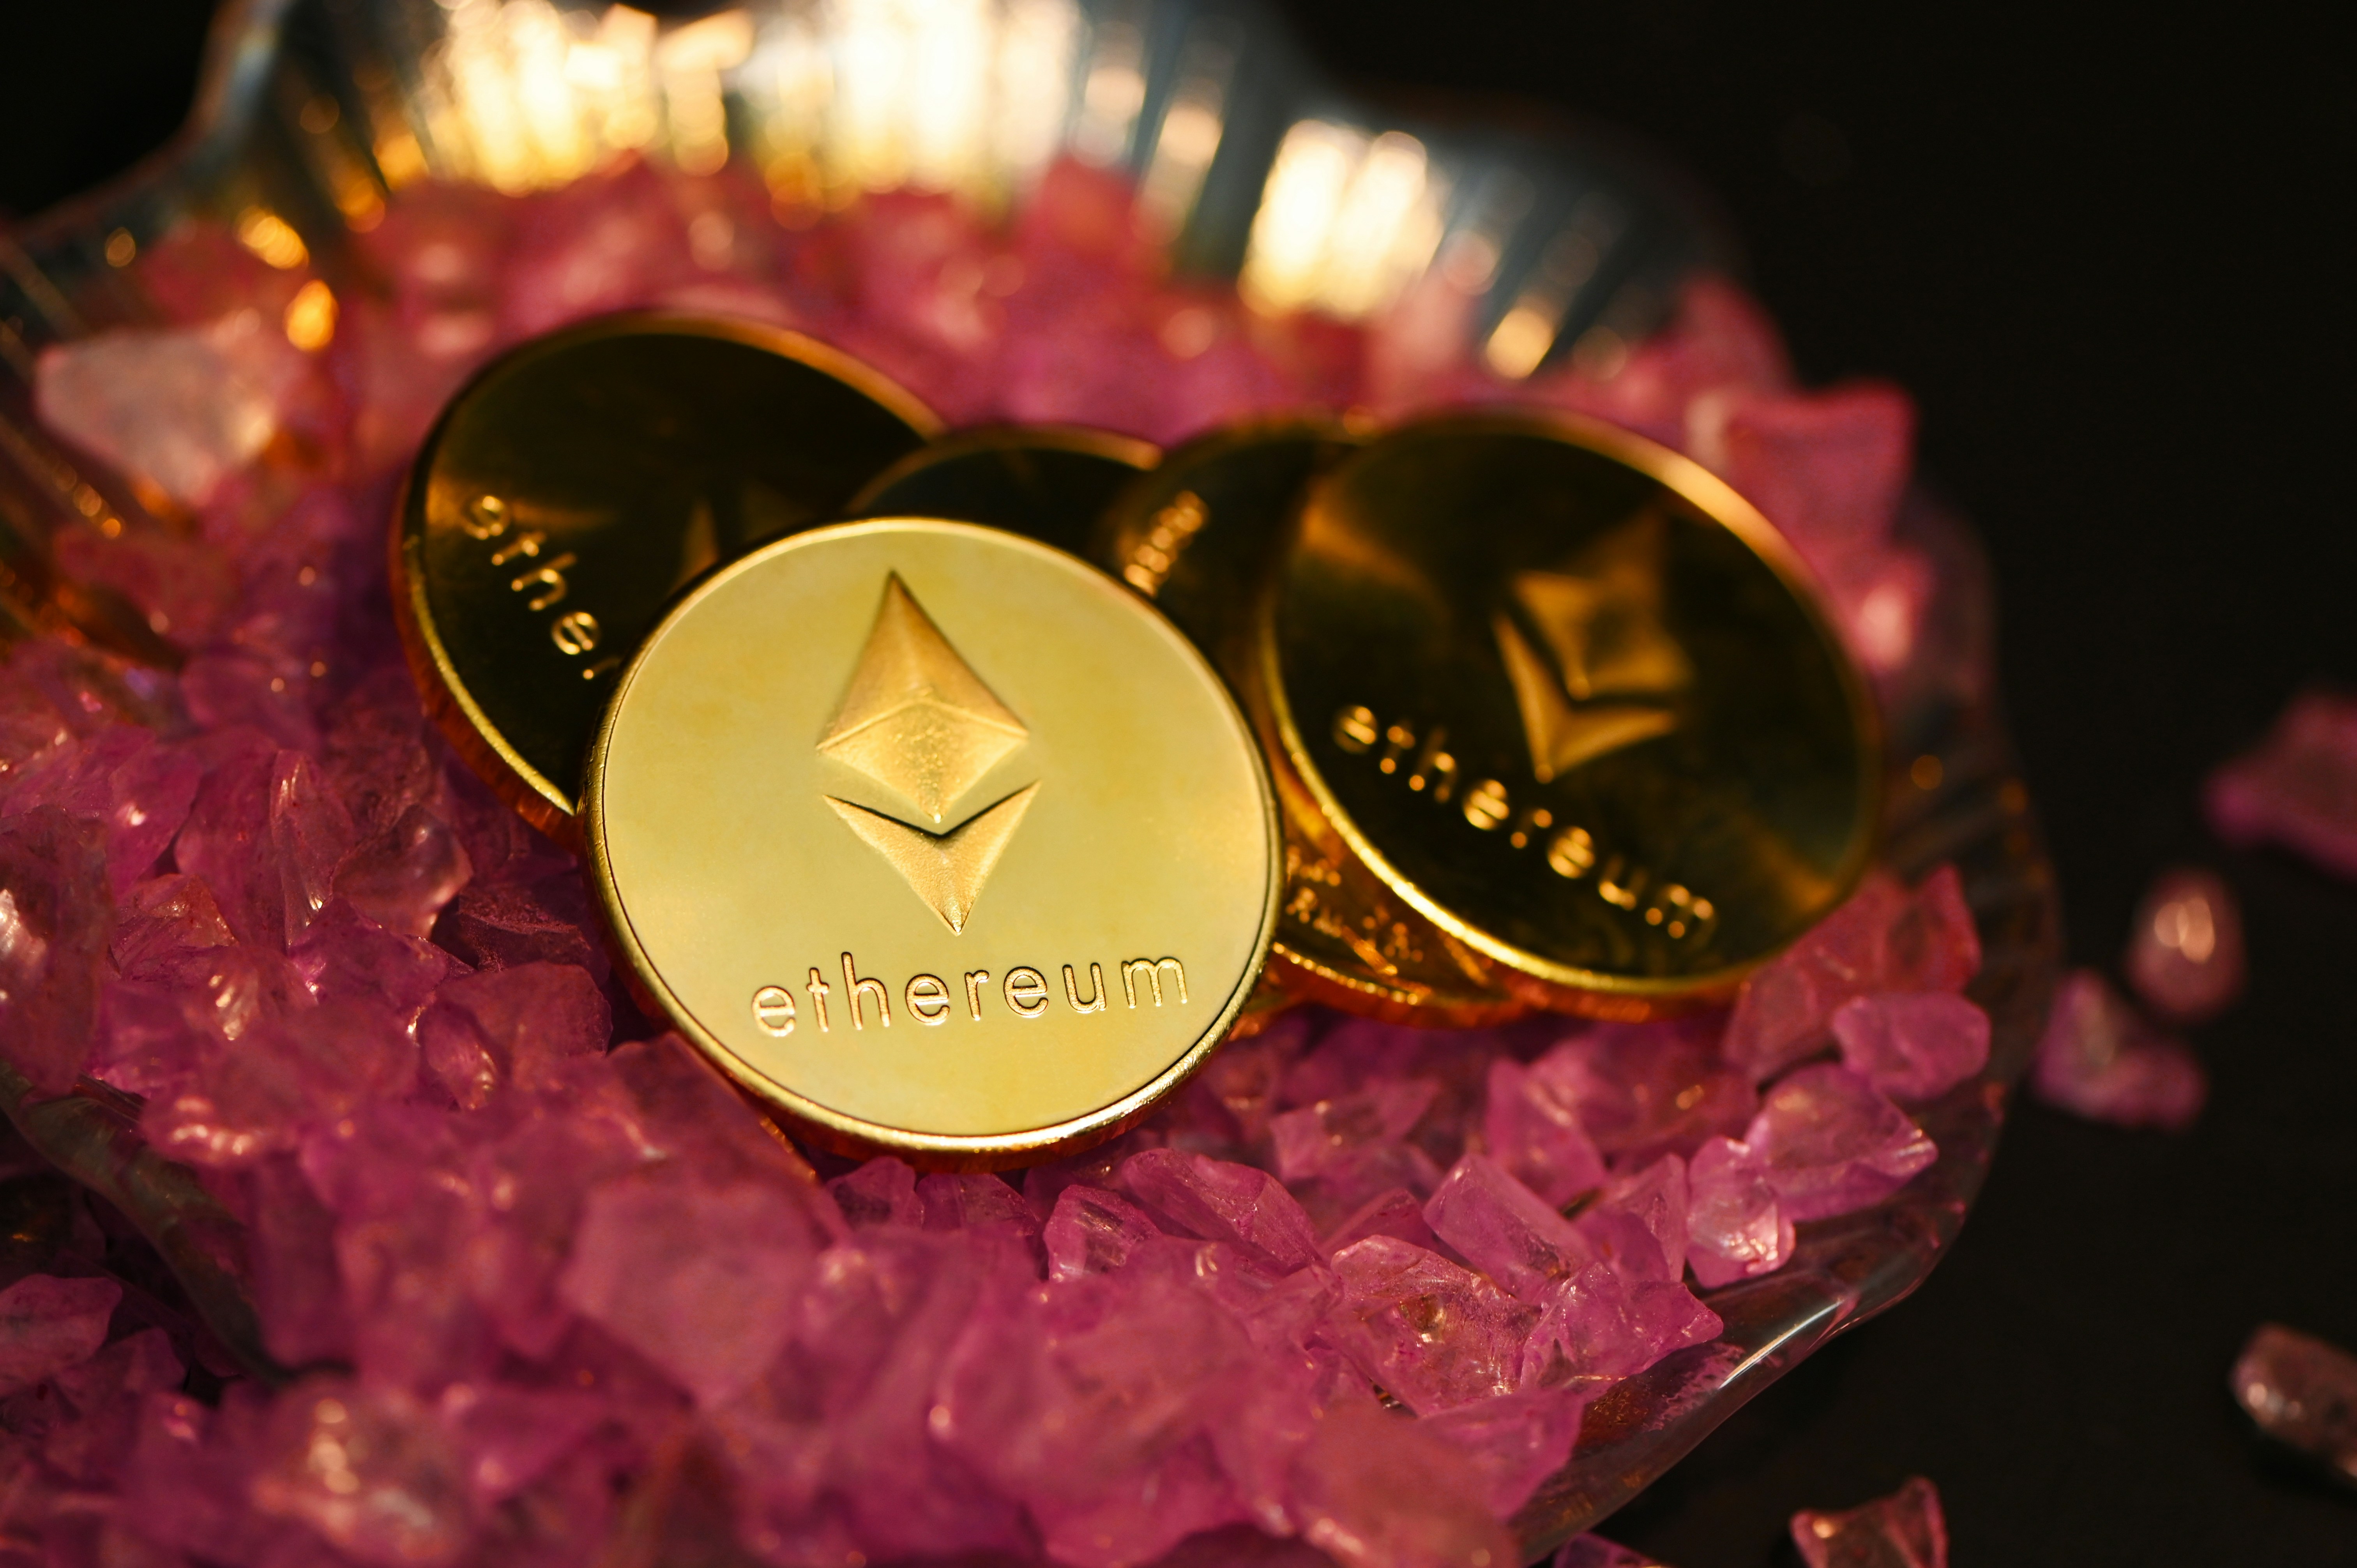 Ethereum coins placed on pink crystals